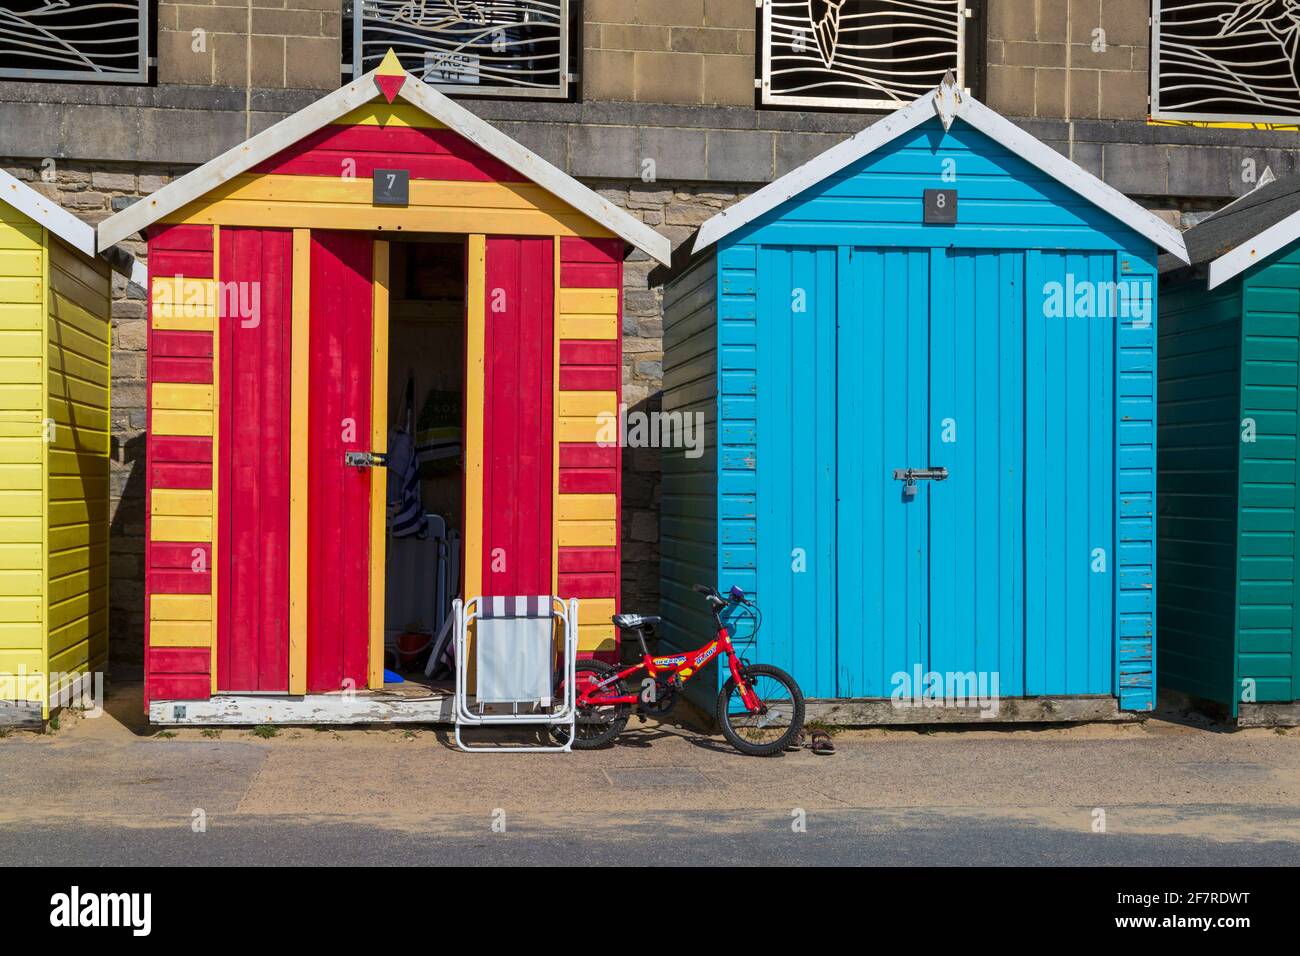 Childs red bike and foldable chair outside colourful beach huts at Boscombe, Bournemouth, Dorset UK in April Stock Photo